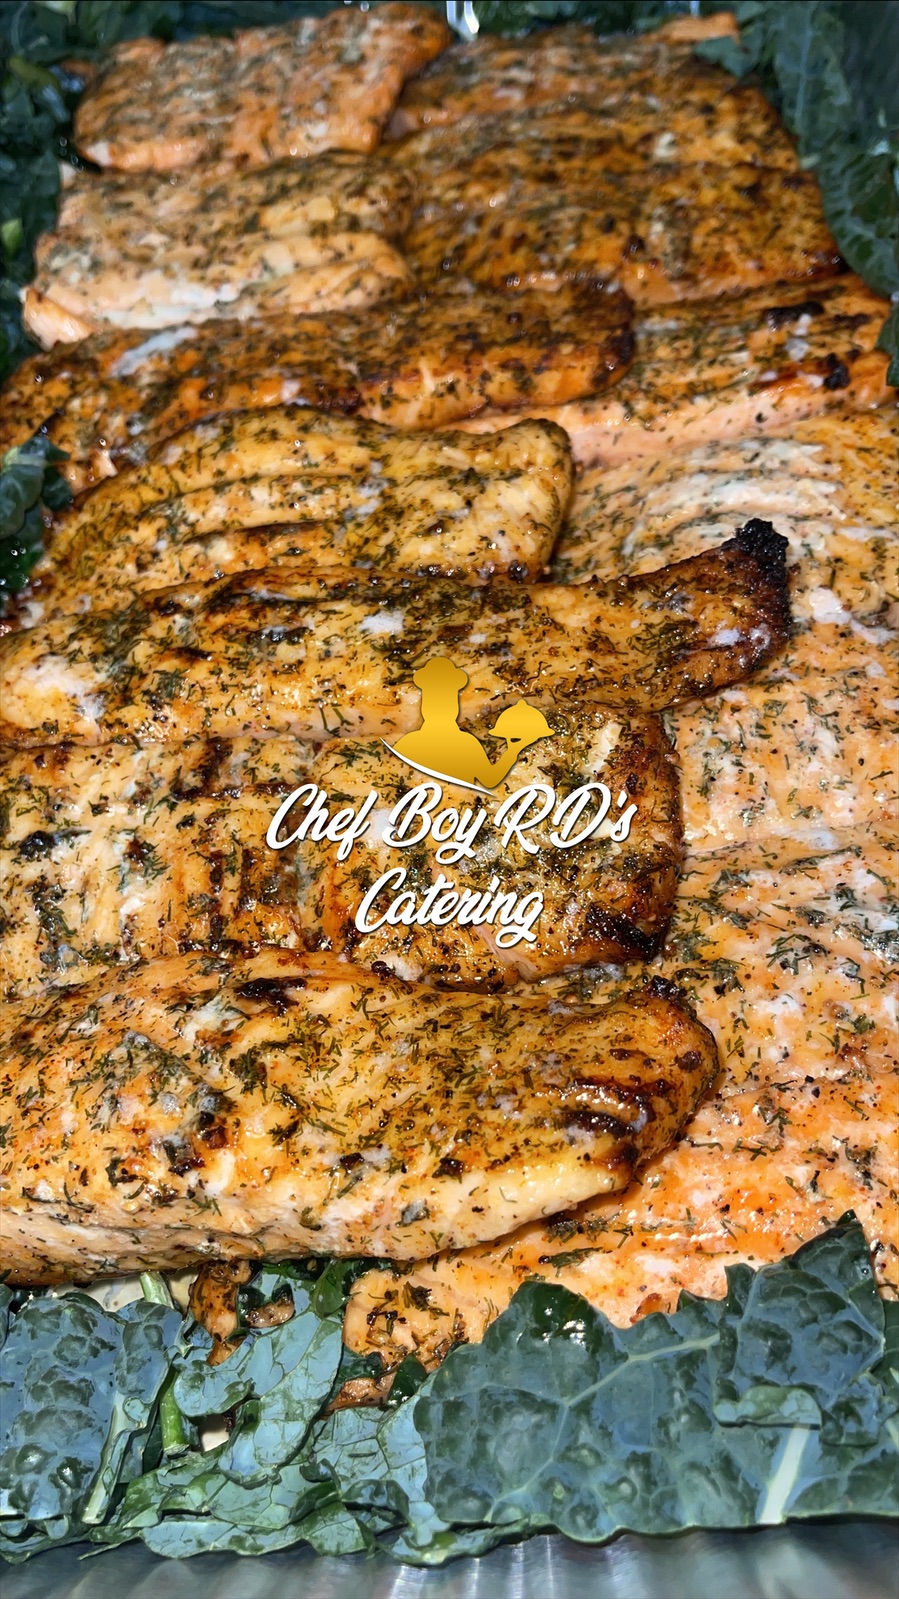 ChefBoy Rd’s Catering